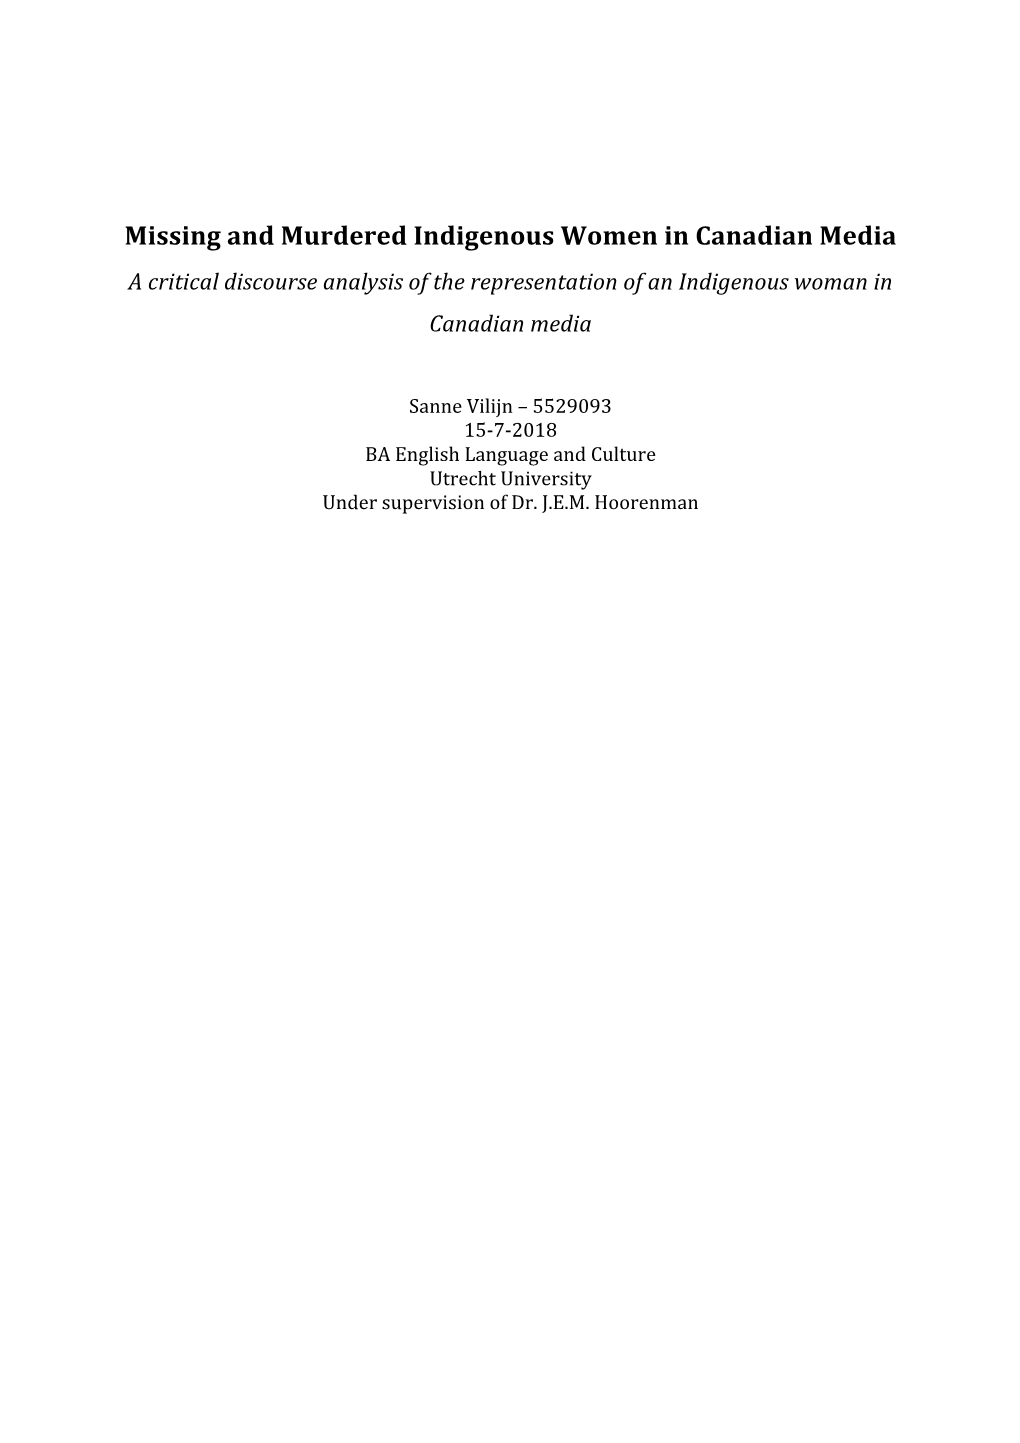 Missing and Murdered Indigenous Women in Canadian Media a Critical Discourse Analysis of the Representation of an Indigenous Woman in Canadian Media